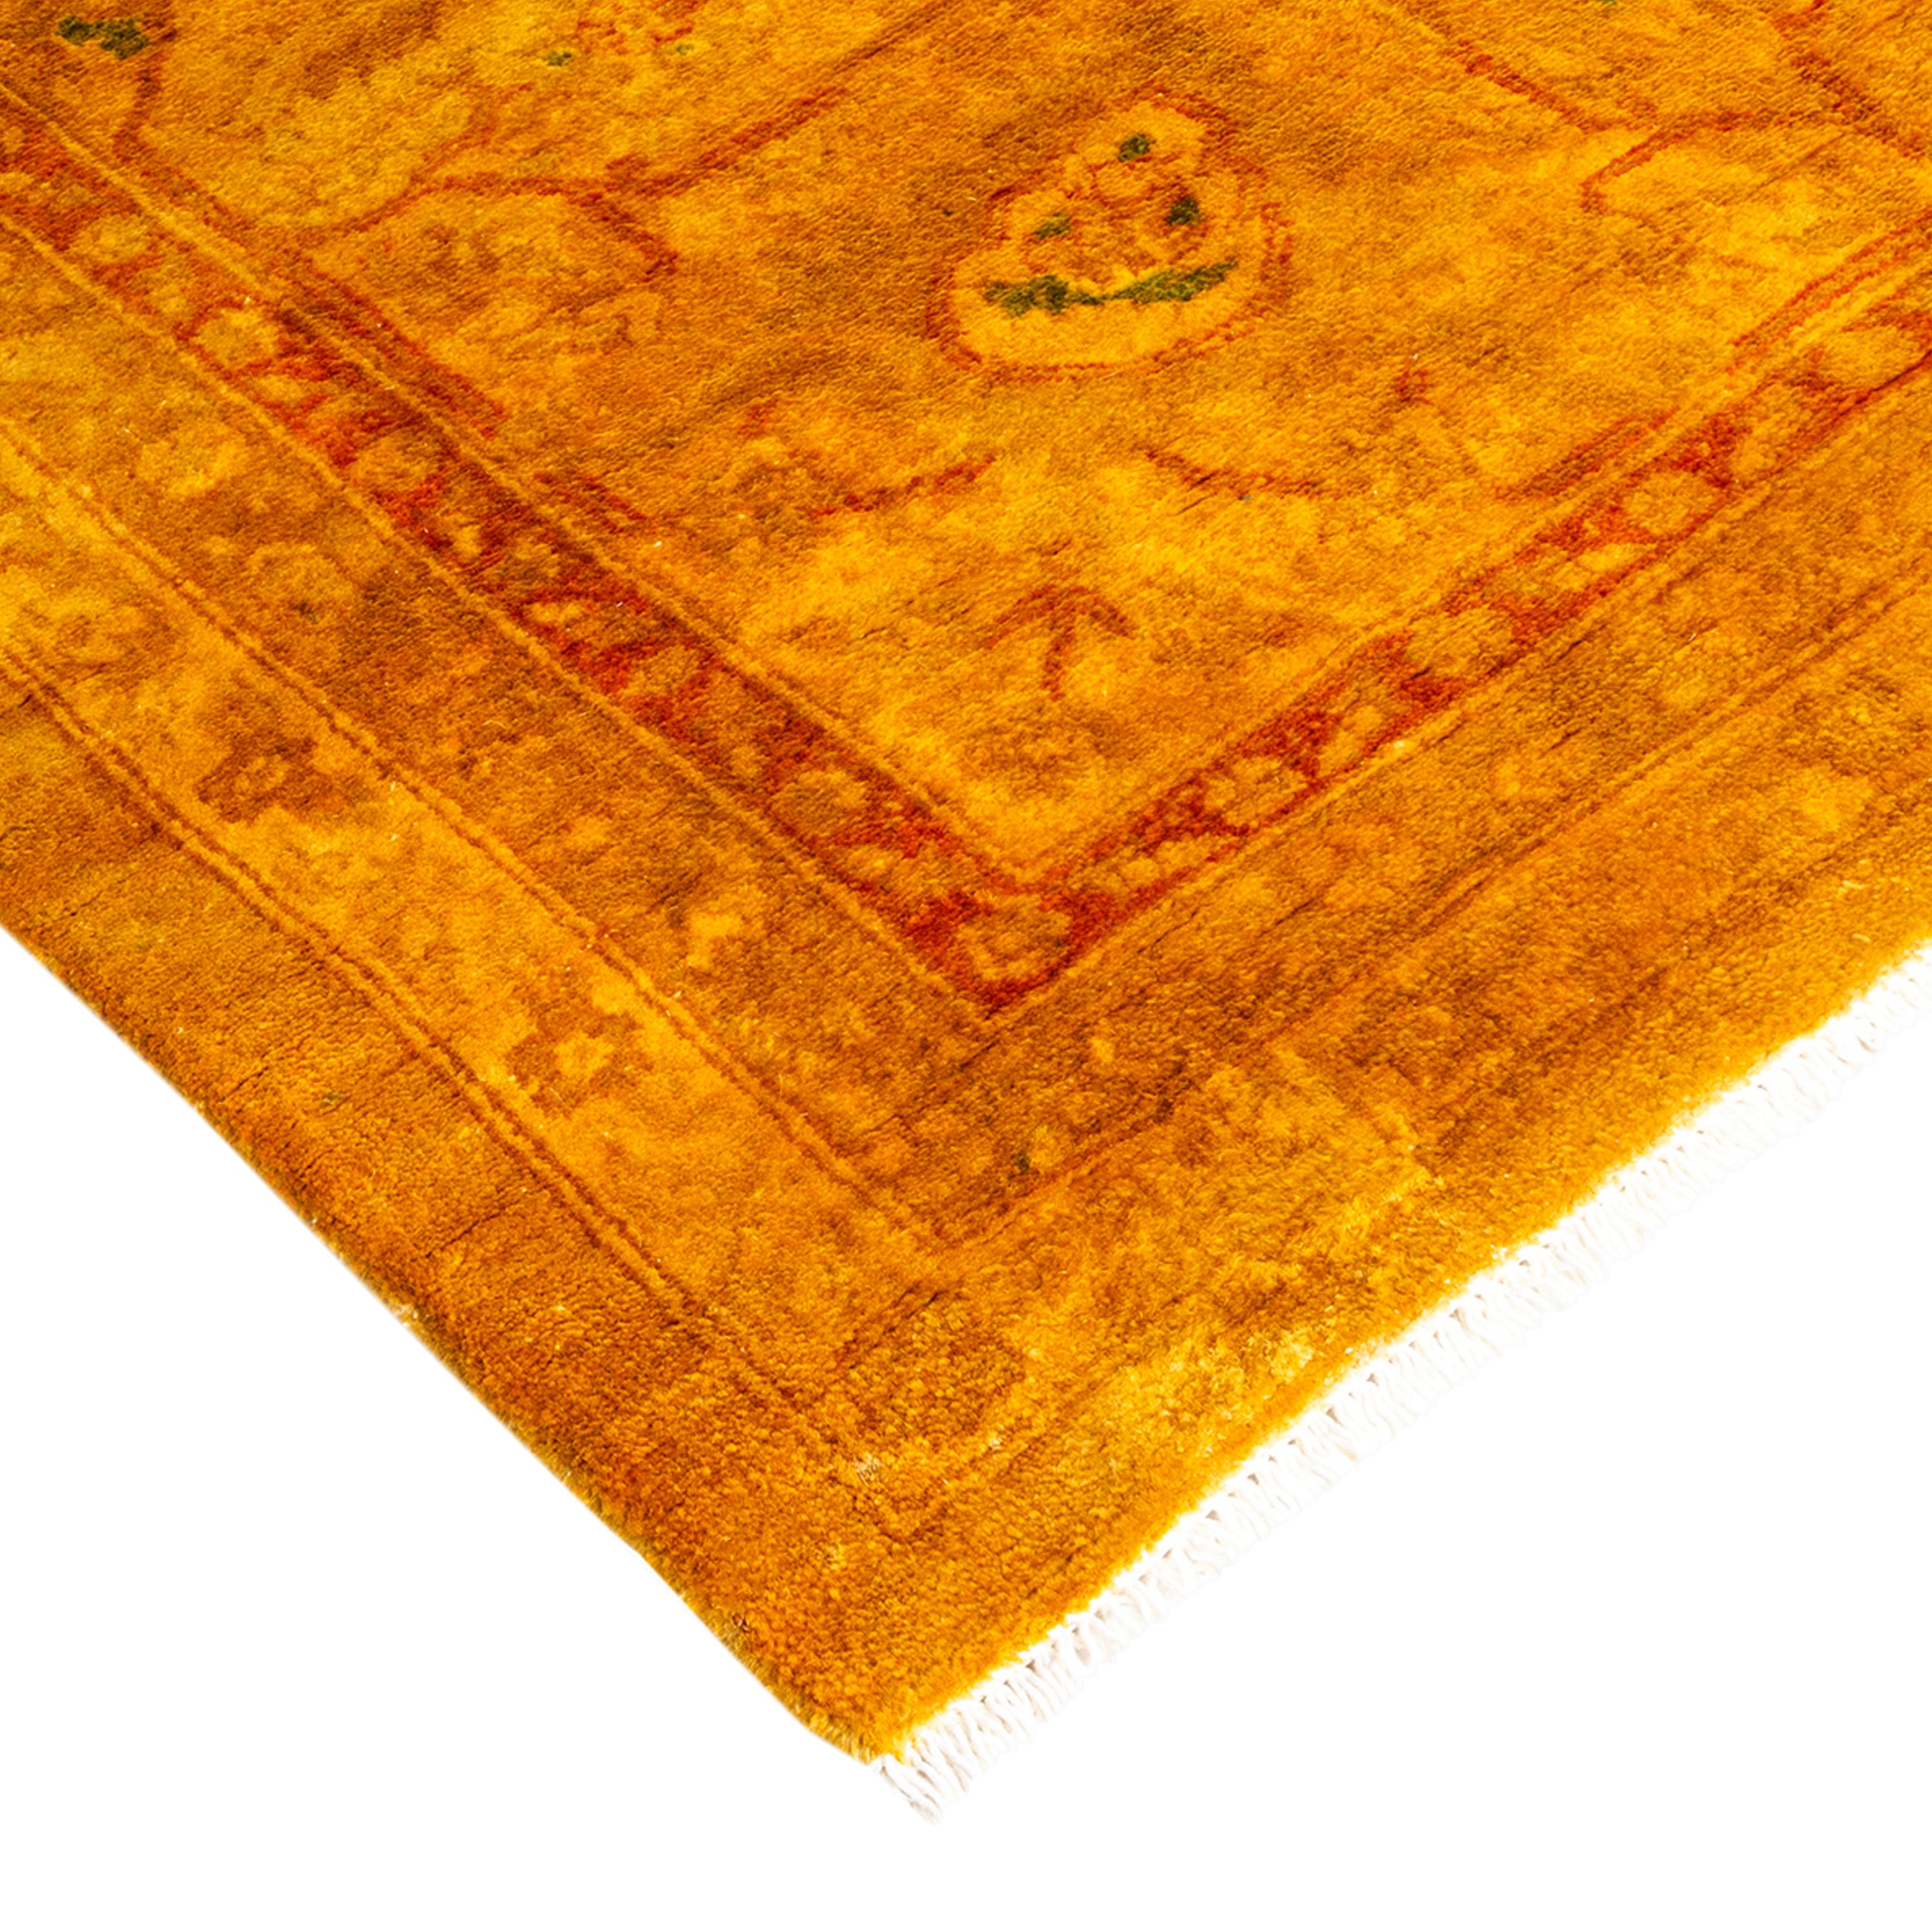 Gold Overdyed Wool Rug - 8' 0" x 9' 8"